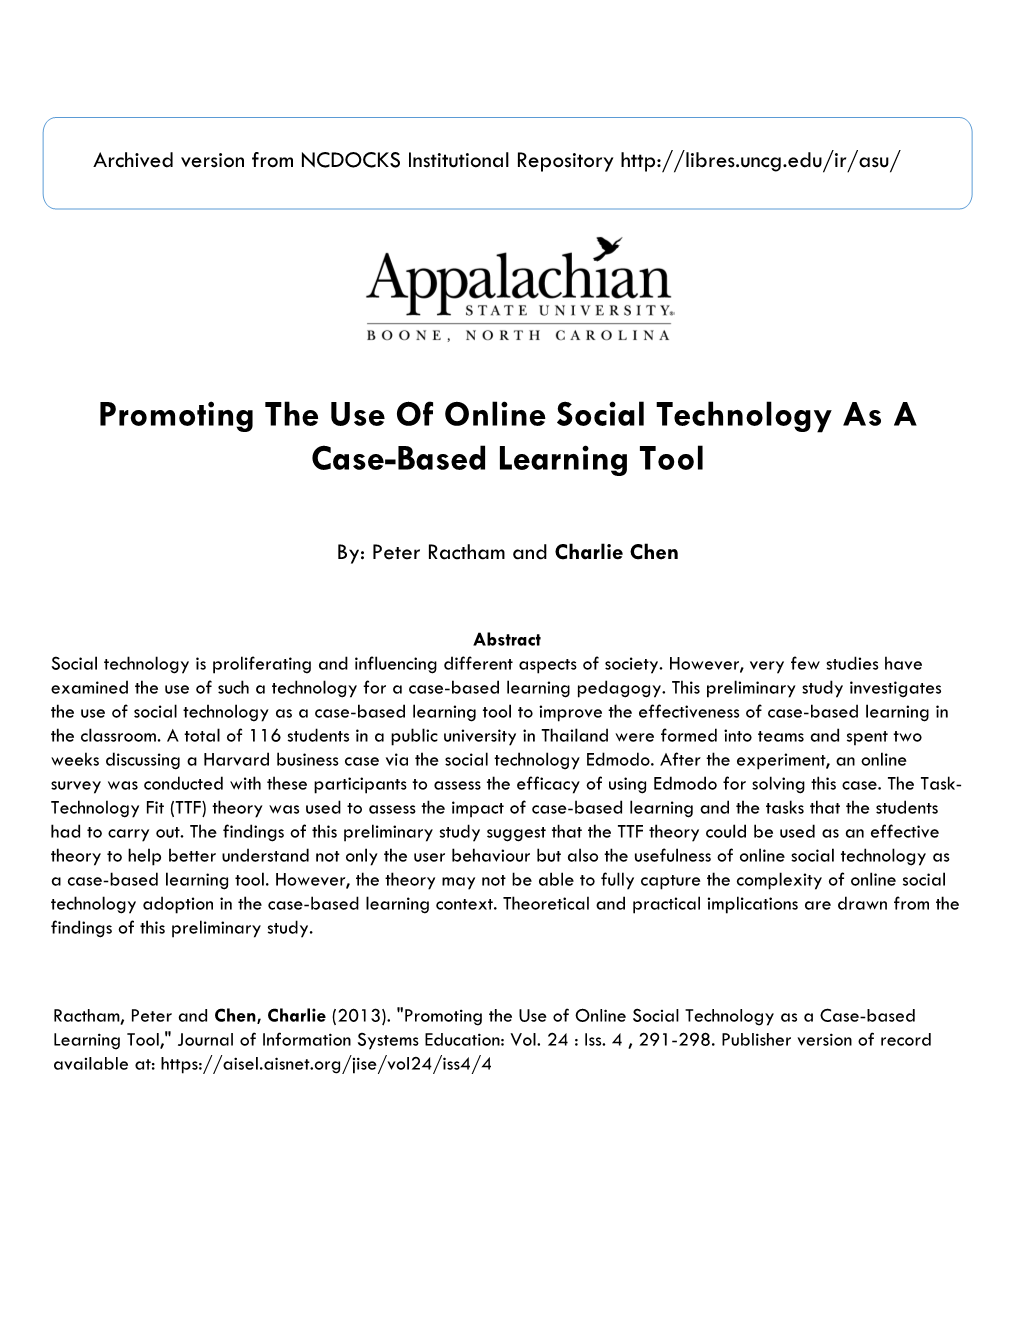 Promoting the Use of Online Social Technology As a Case-Based Learning Tool